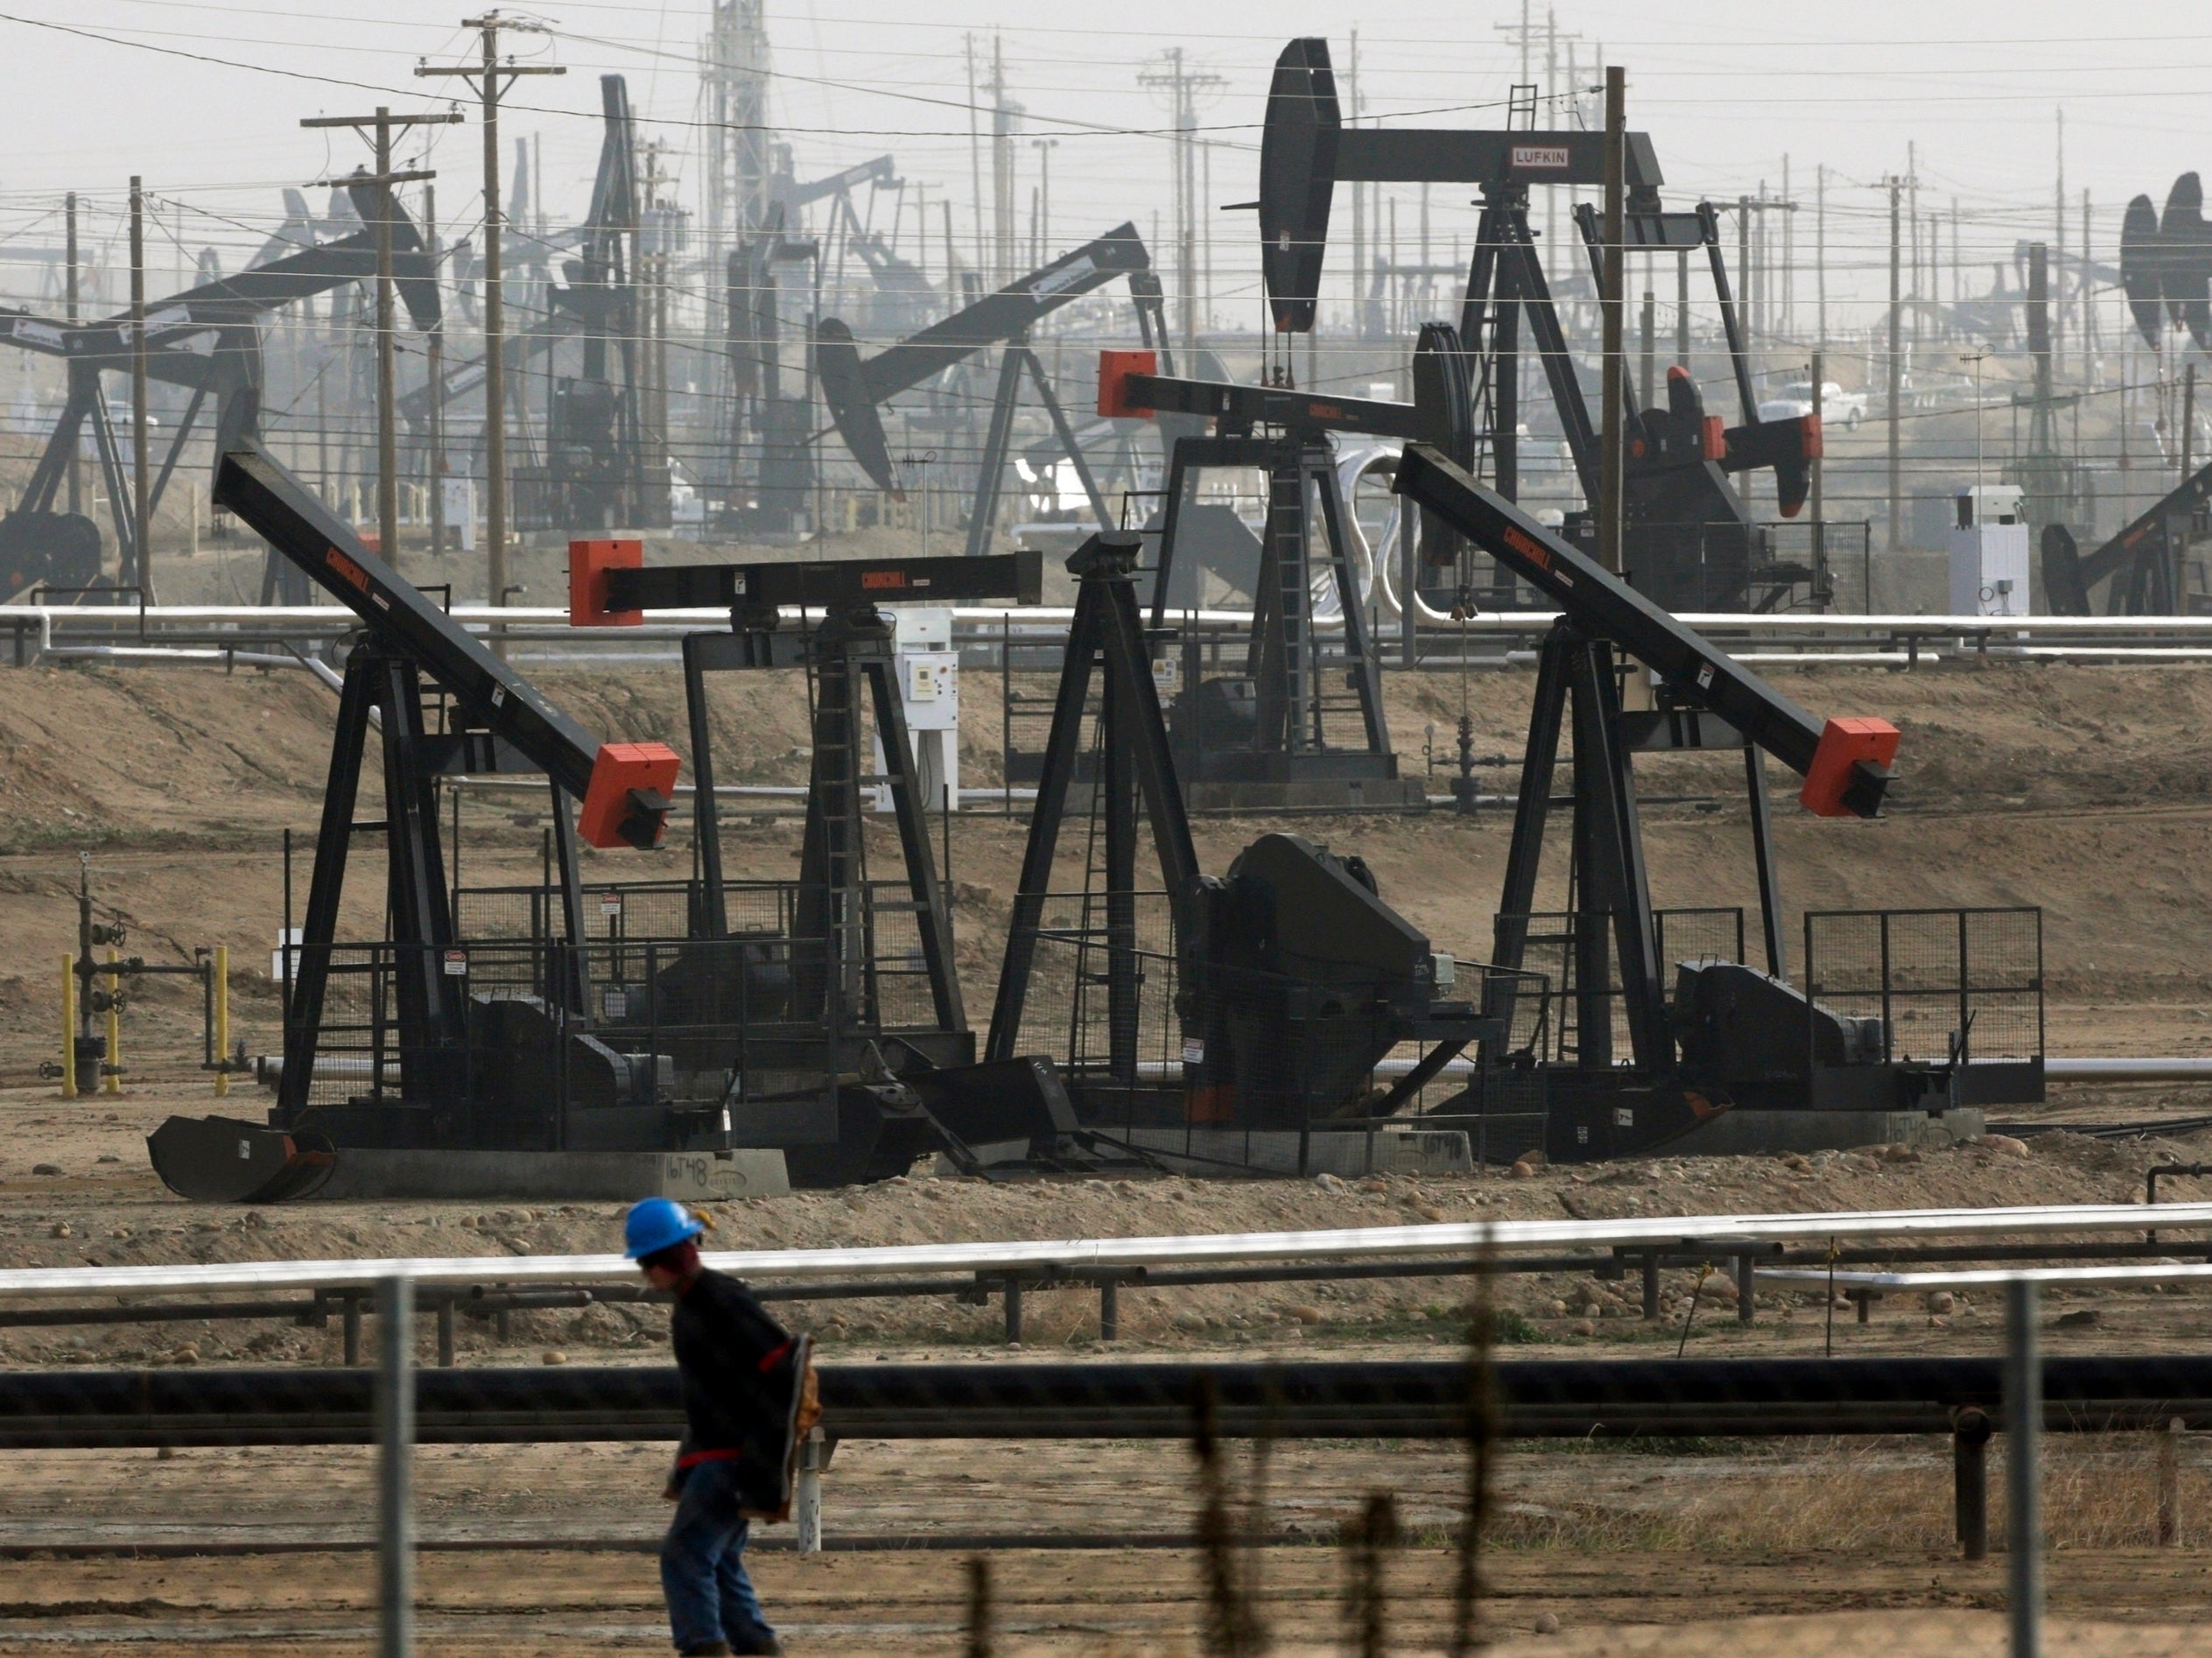 Pumpjacks are seen operating in Bakersfield, California in a fracking operation in 2016